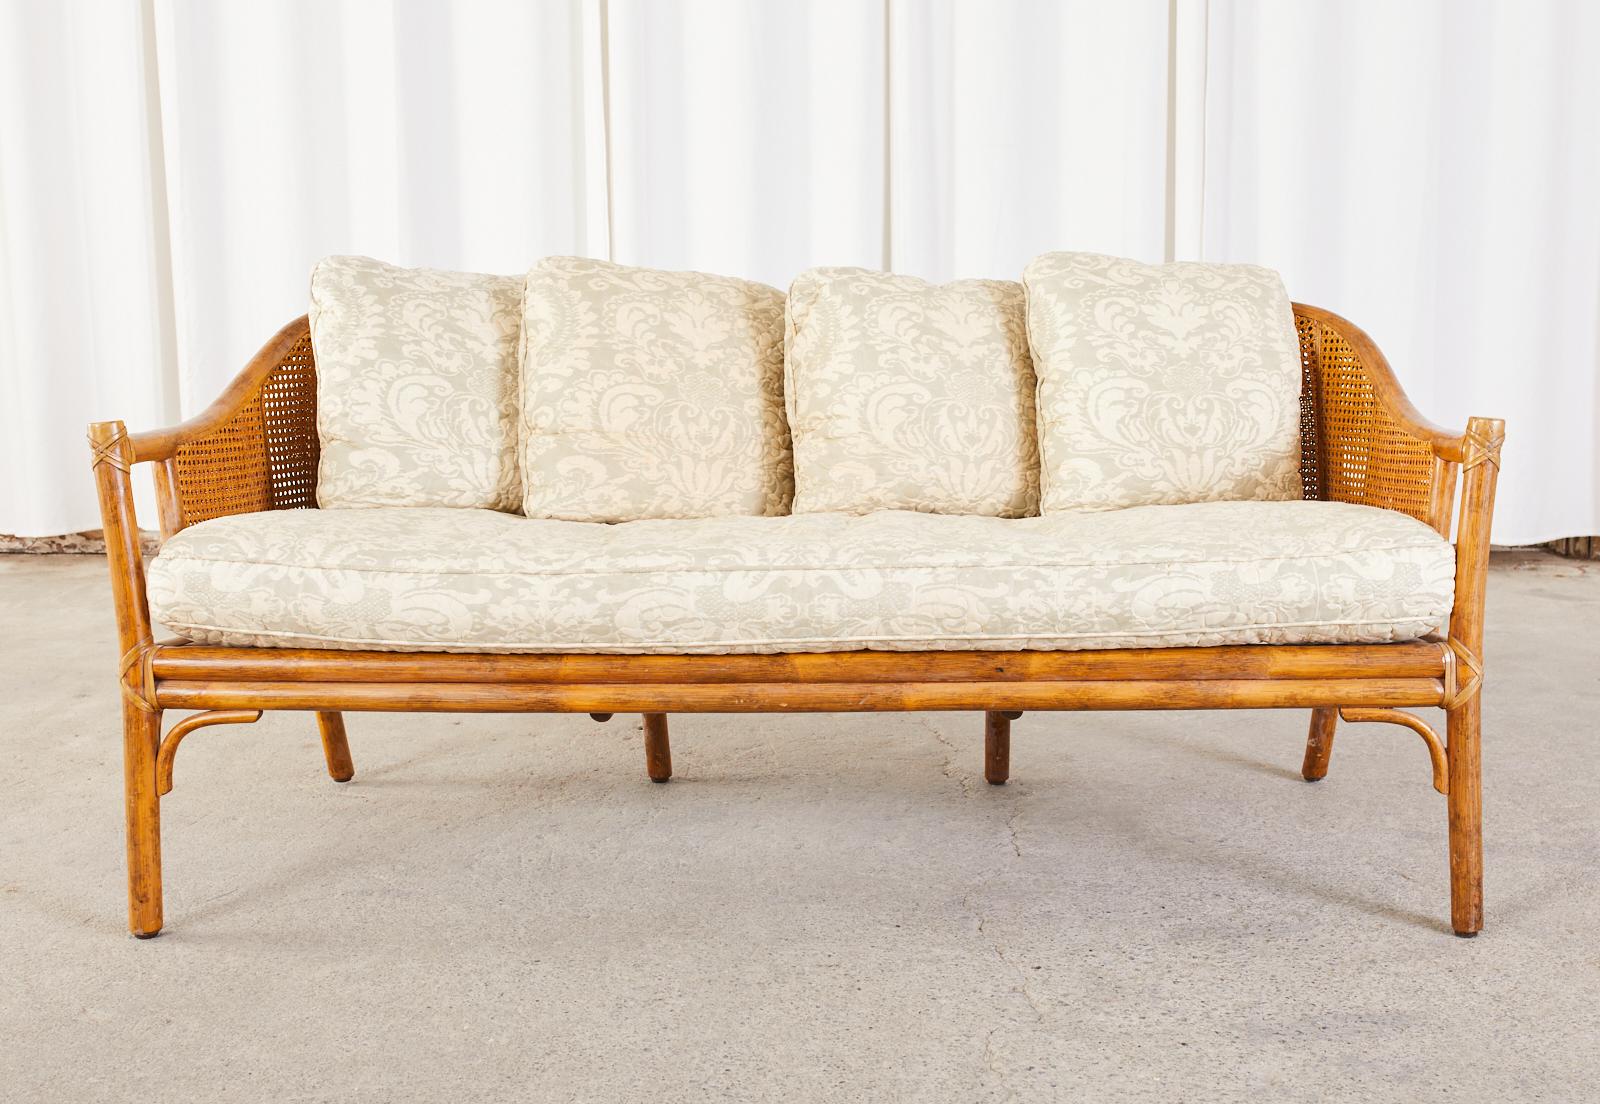 Genuine McGuire sofa settee made in the California organic modern style. The sofa features a bamboo rattan pole frame with double caned walls. Lashed together on all exposed joints with leather rawhide laces. Vintage upholstery includes a large